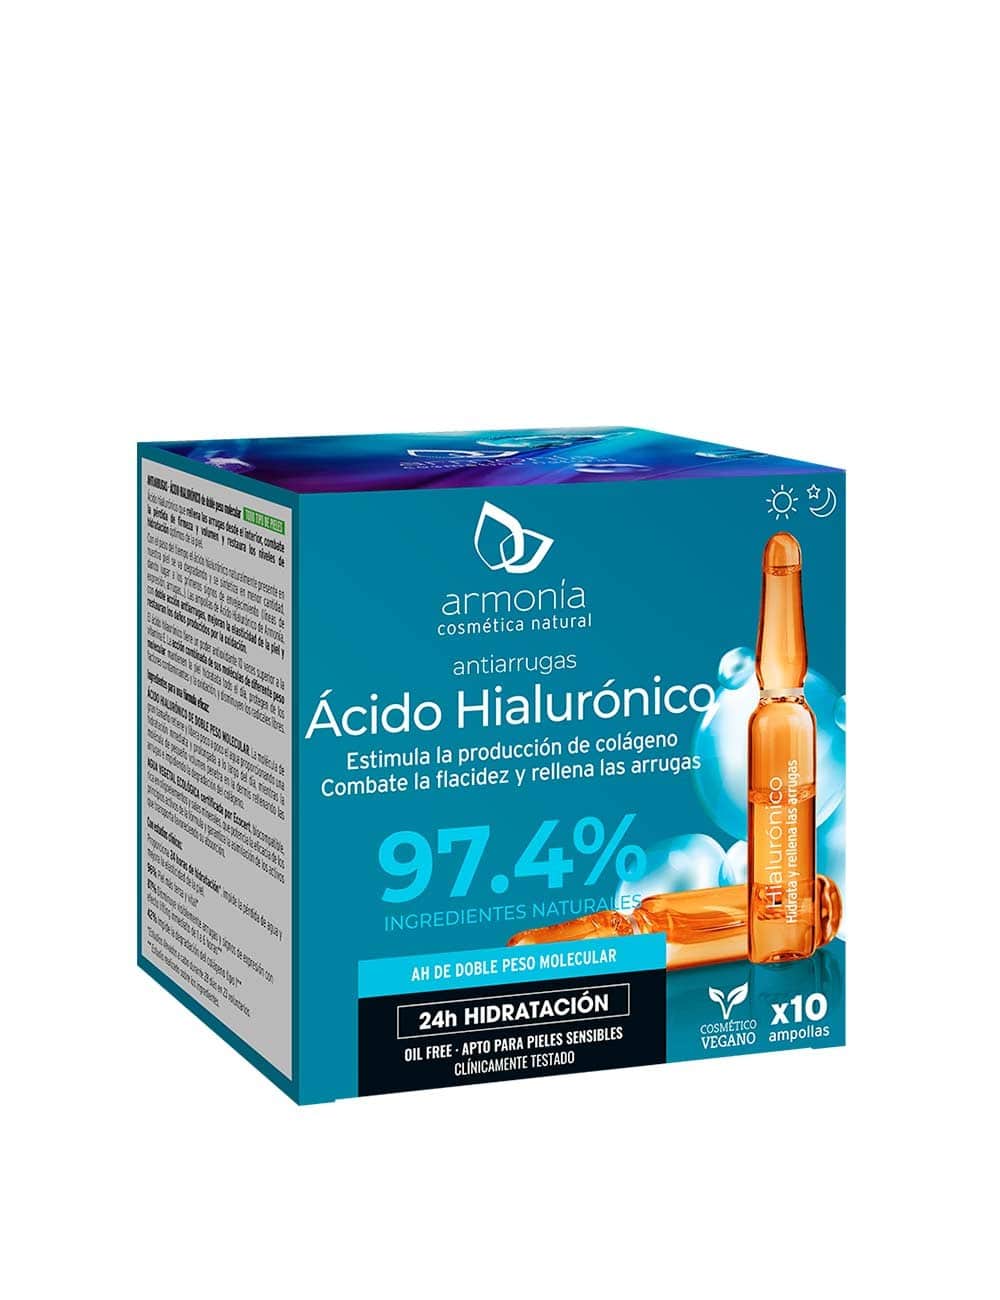 Hyaluronic Acid Ampoules